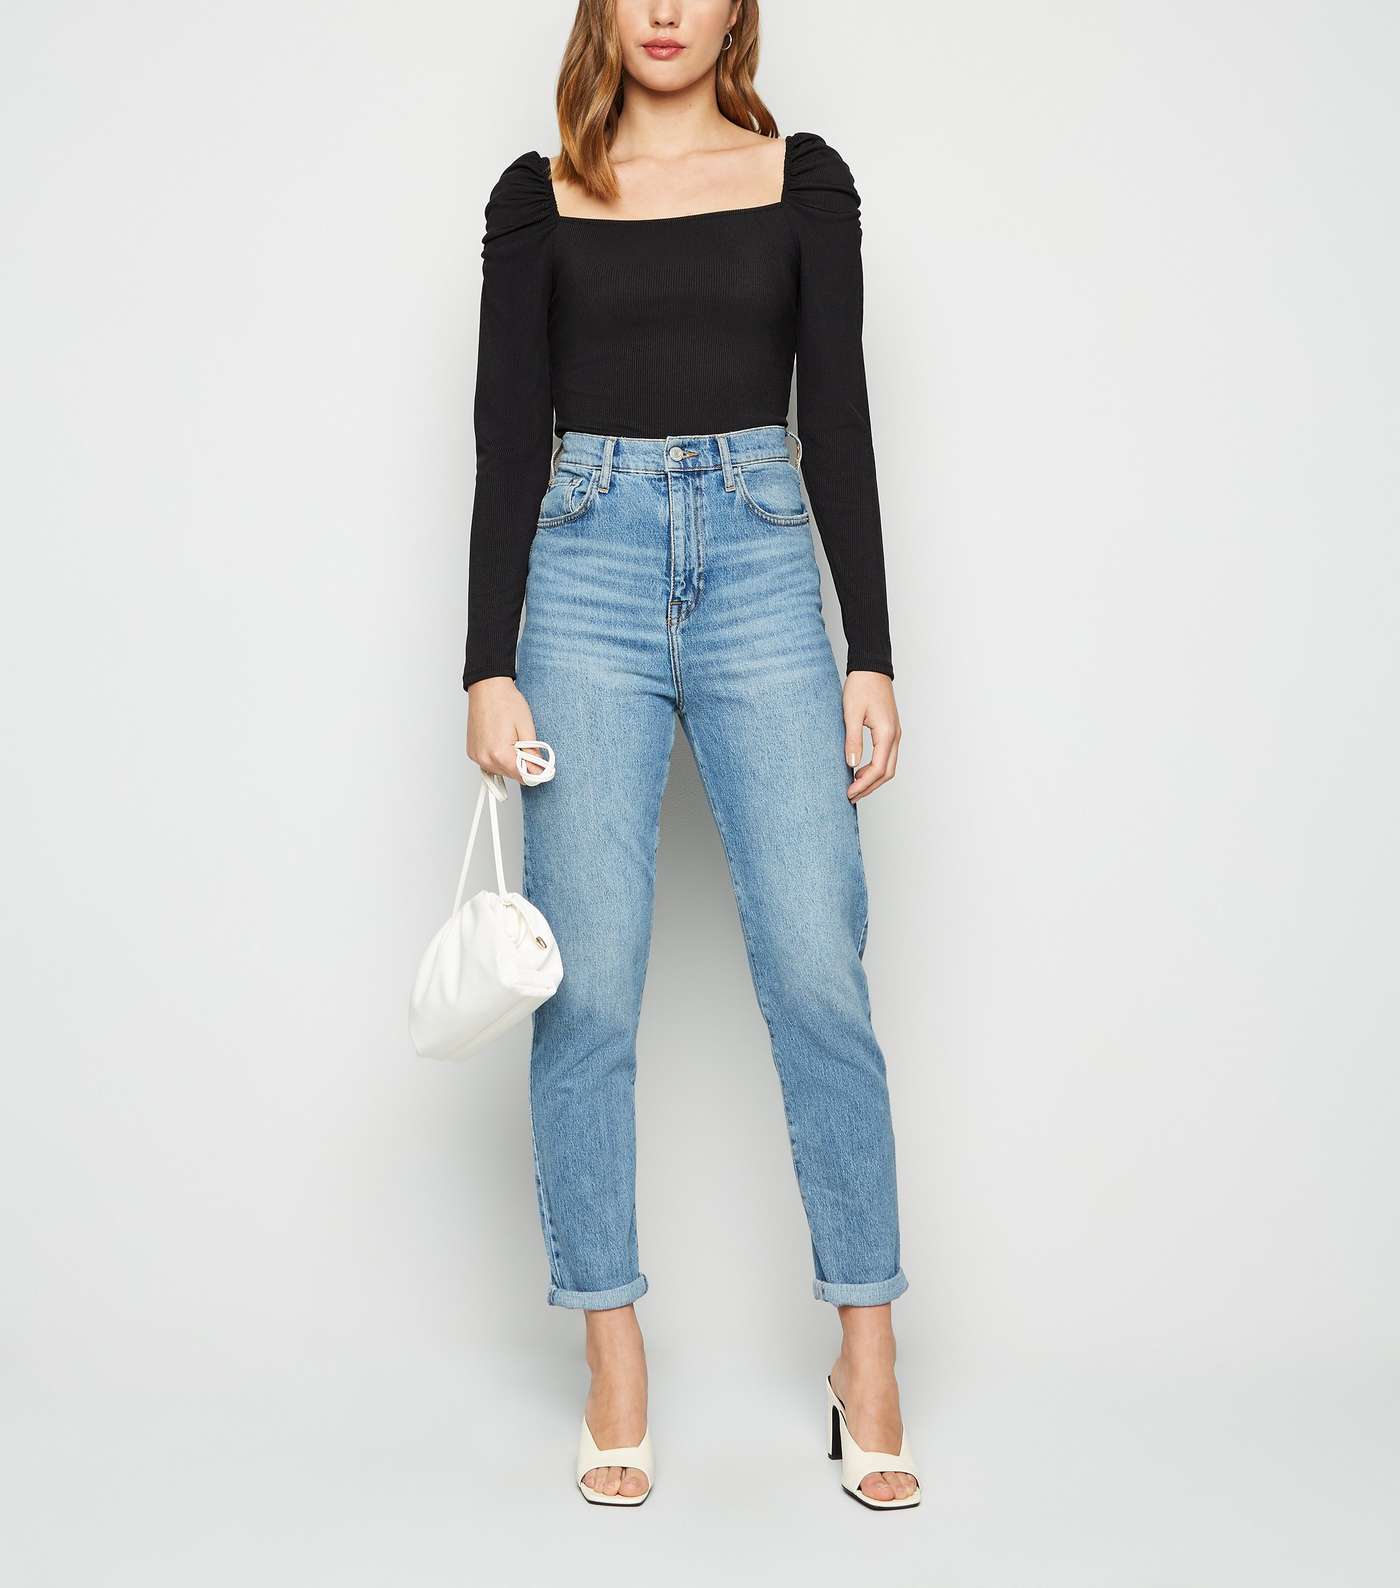 Black Ribbed Square Neck Puff Sleeve Top Image 2